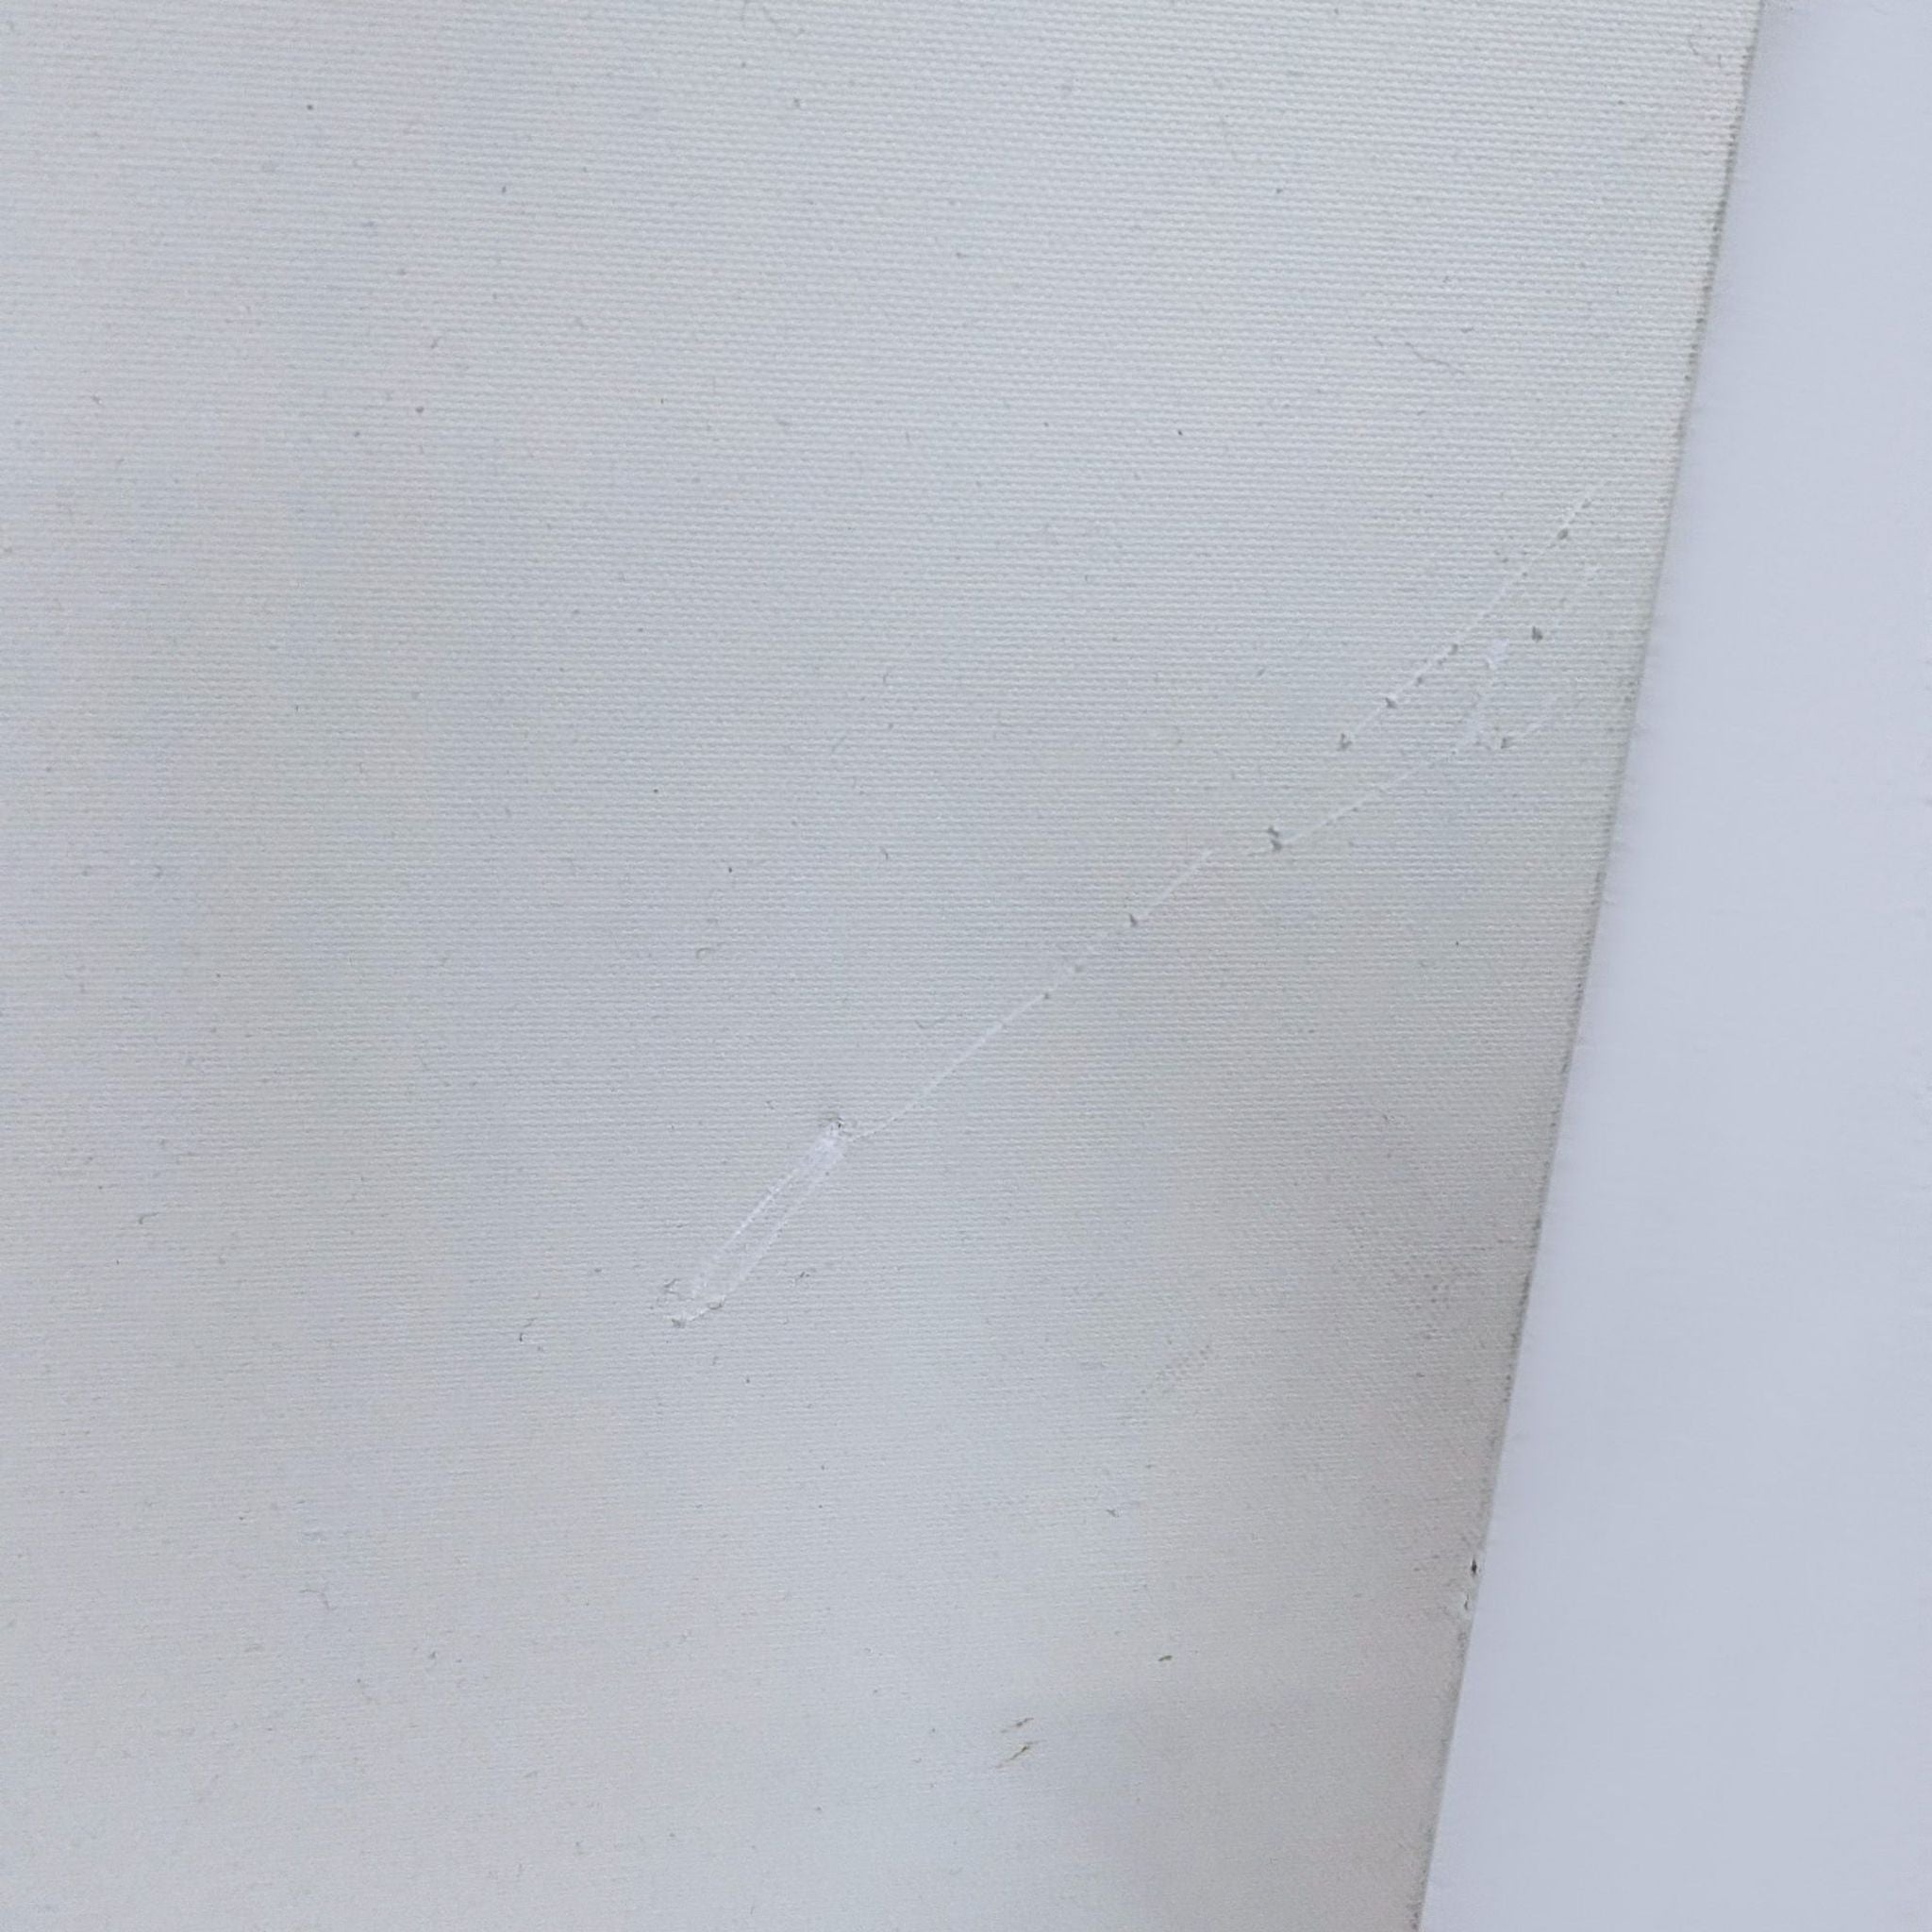 Alt text 2: Close-up of a white canvas texture, showing minor imperfections and subtle marks, part of a Reperch abstract artwork.